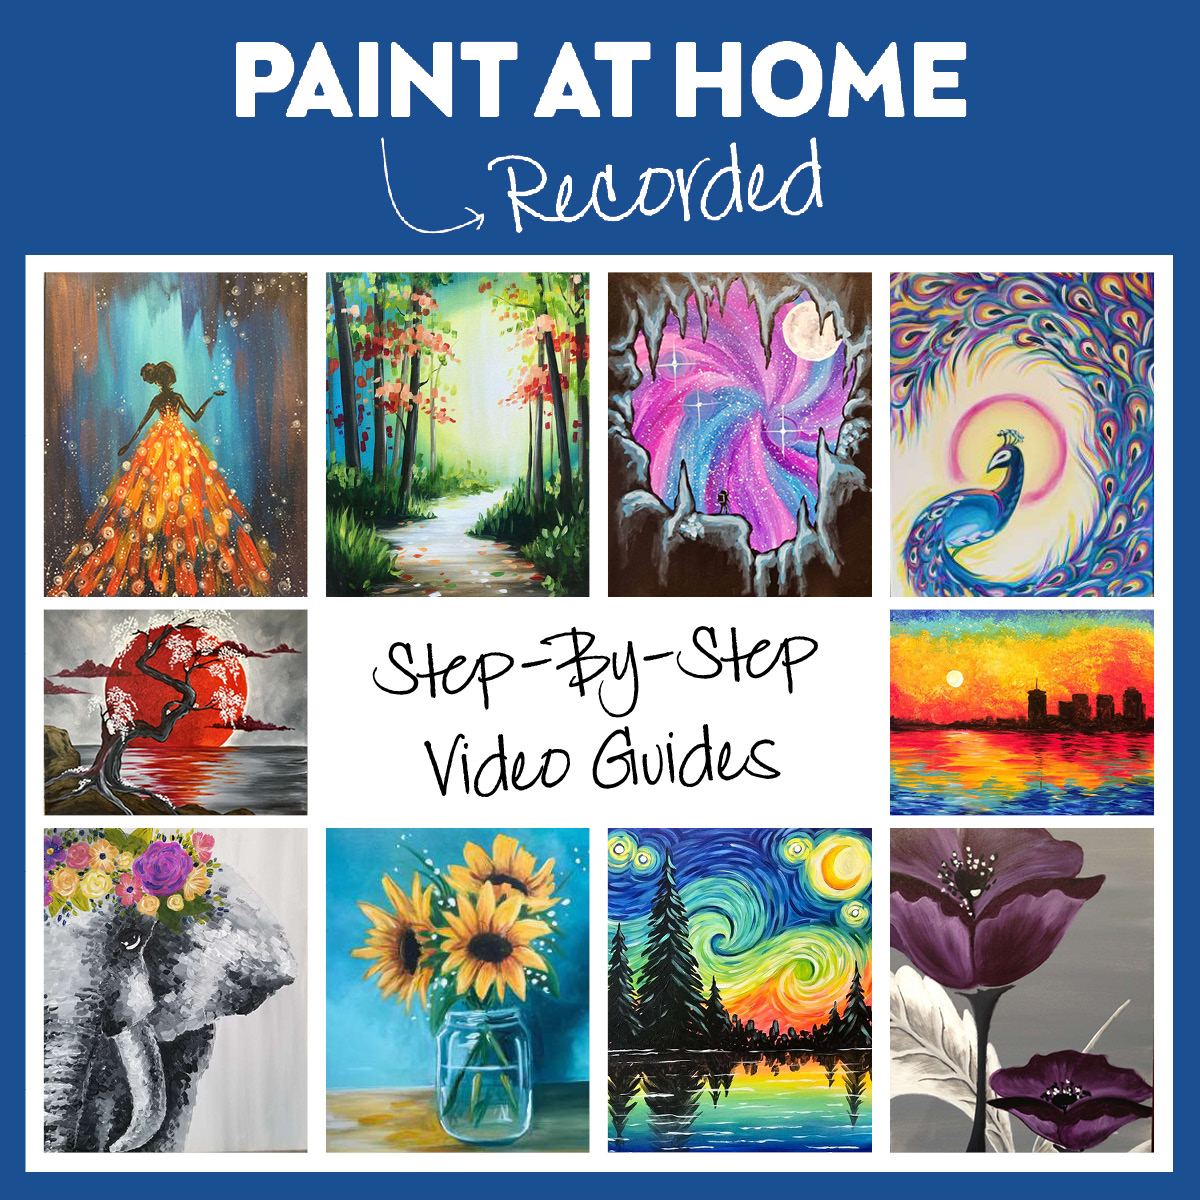 Twist at Home take-home paint kits are now available at Painting